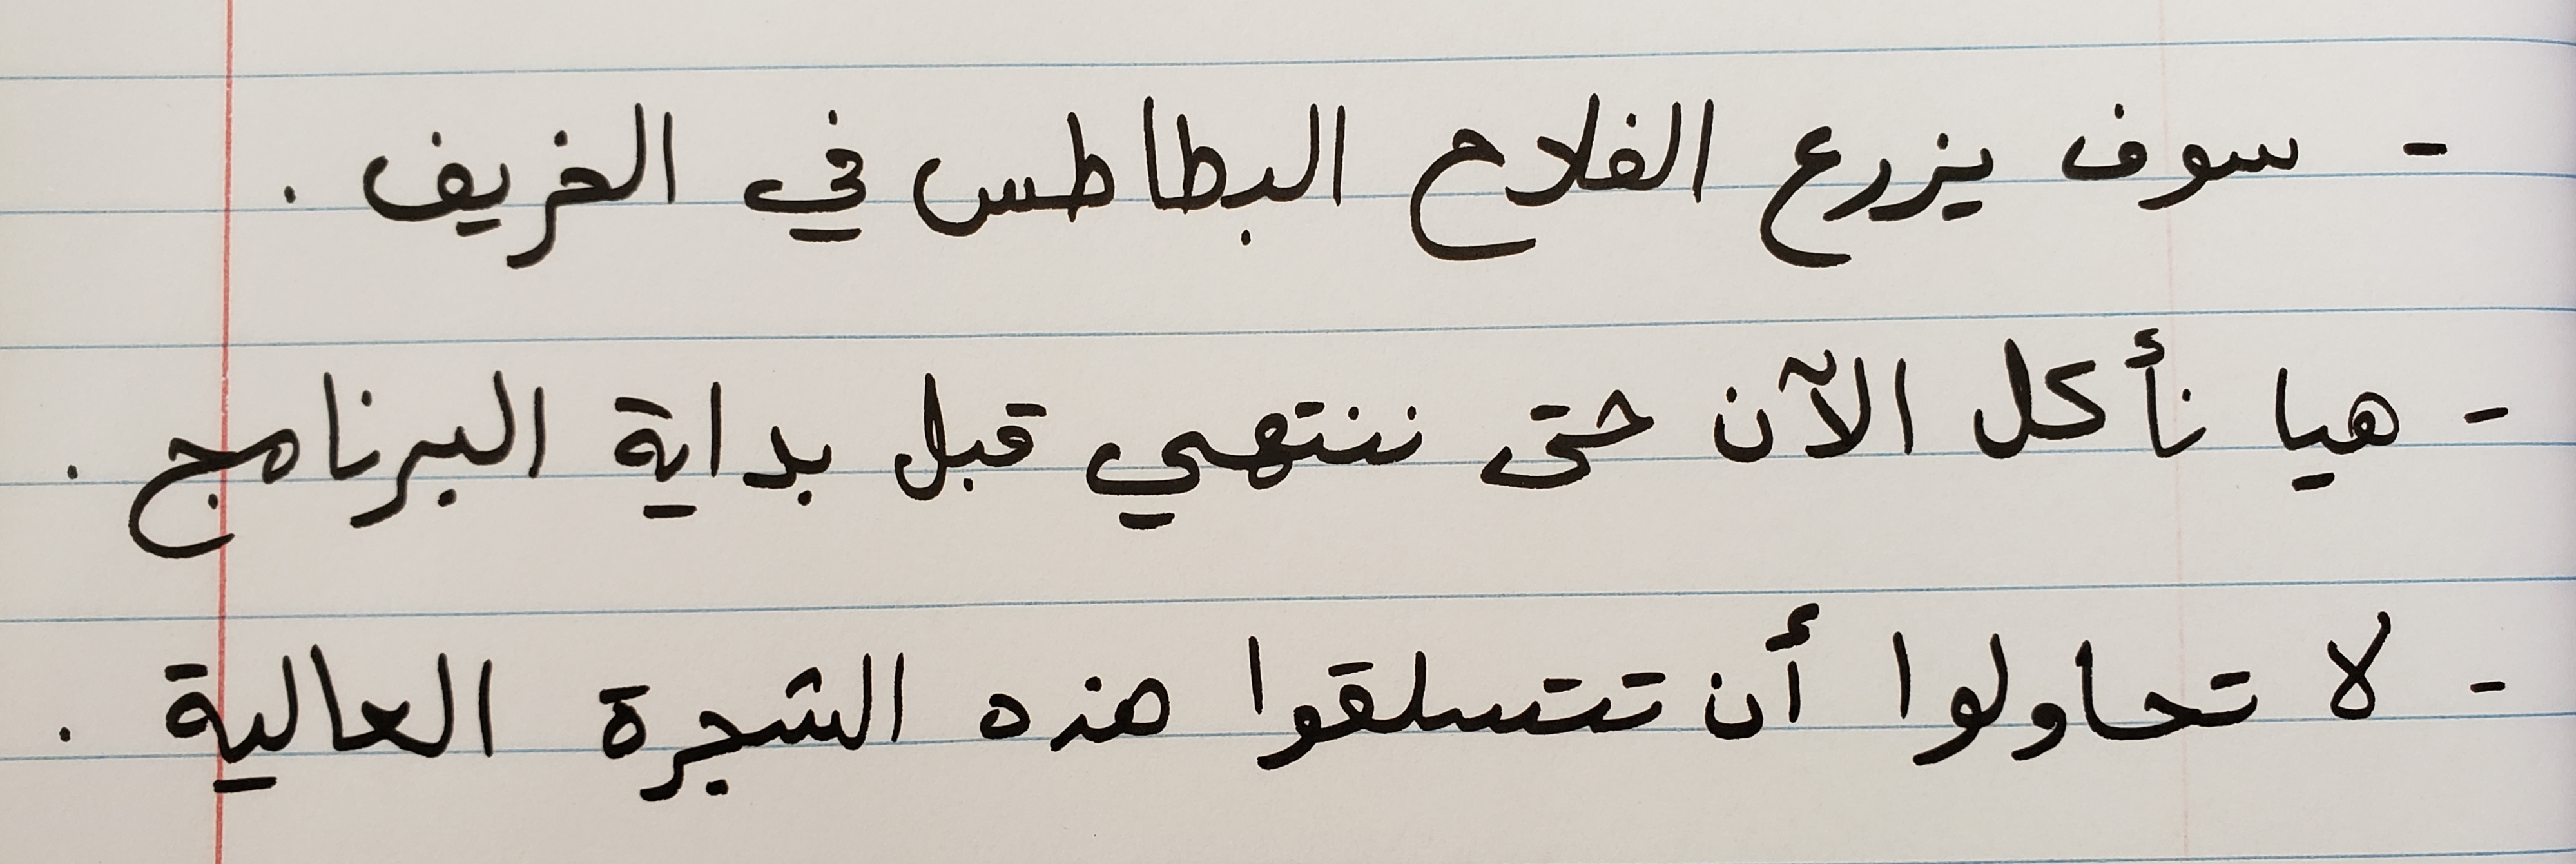 how to write nice in arabic